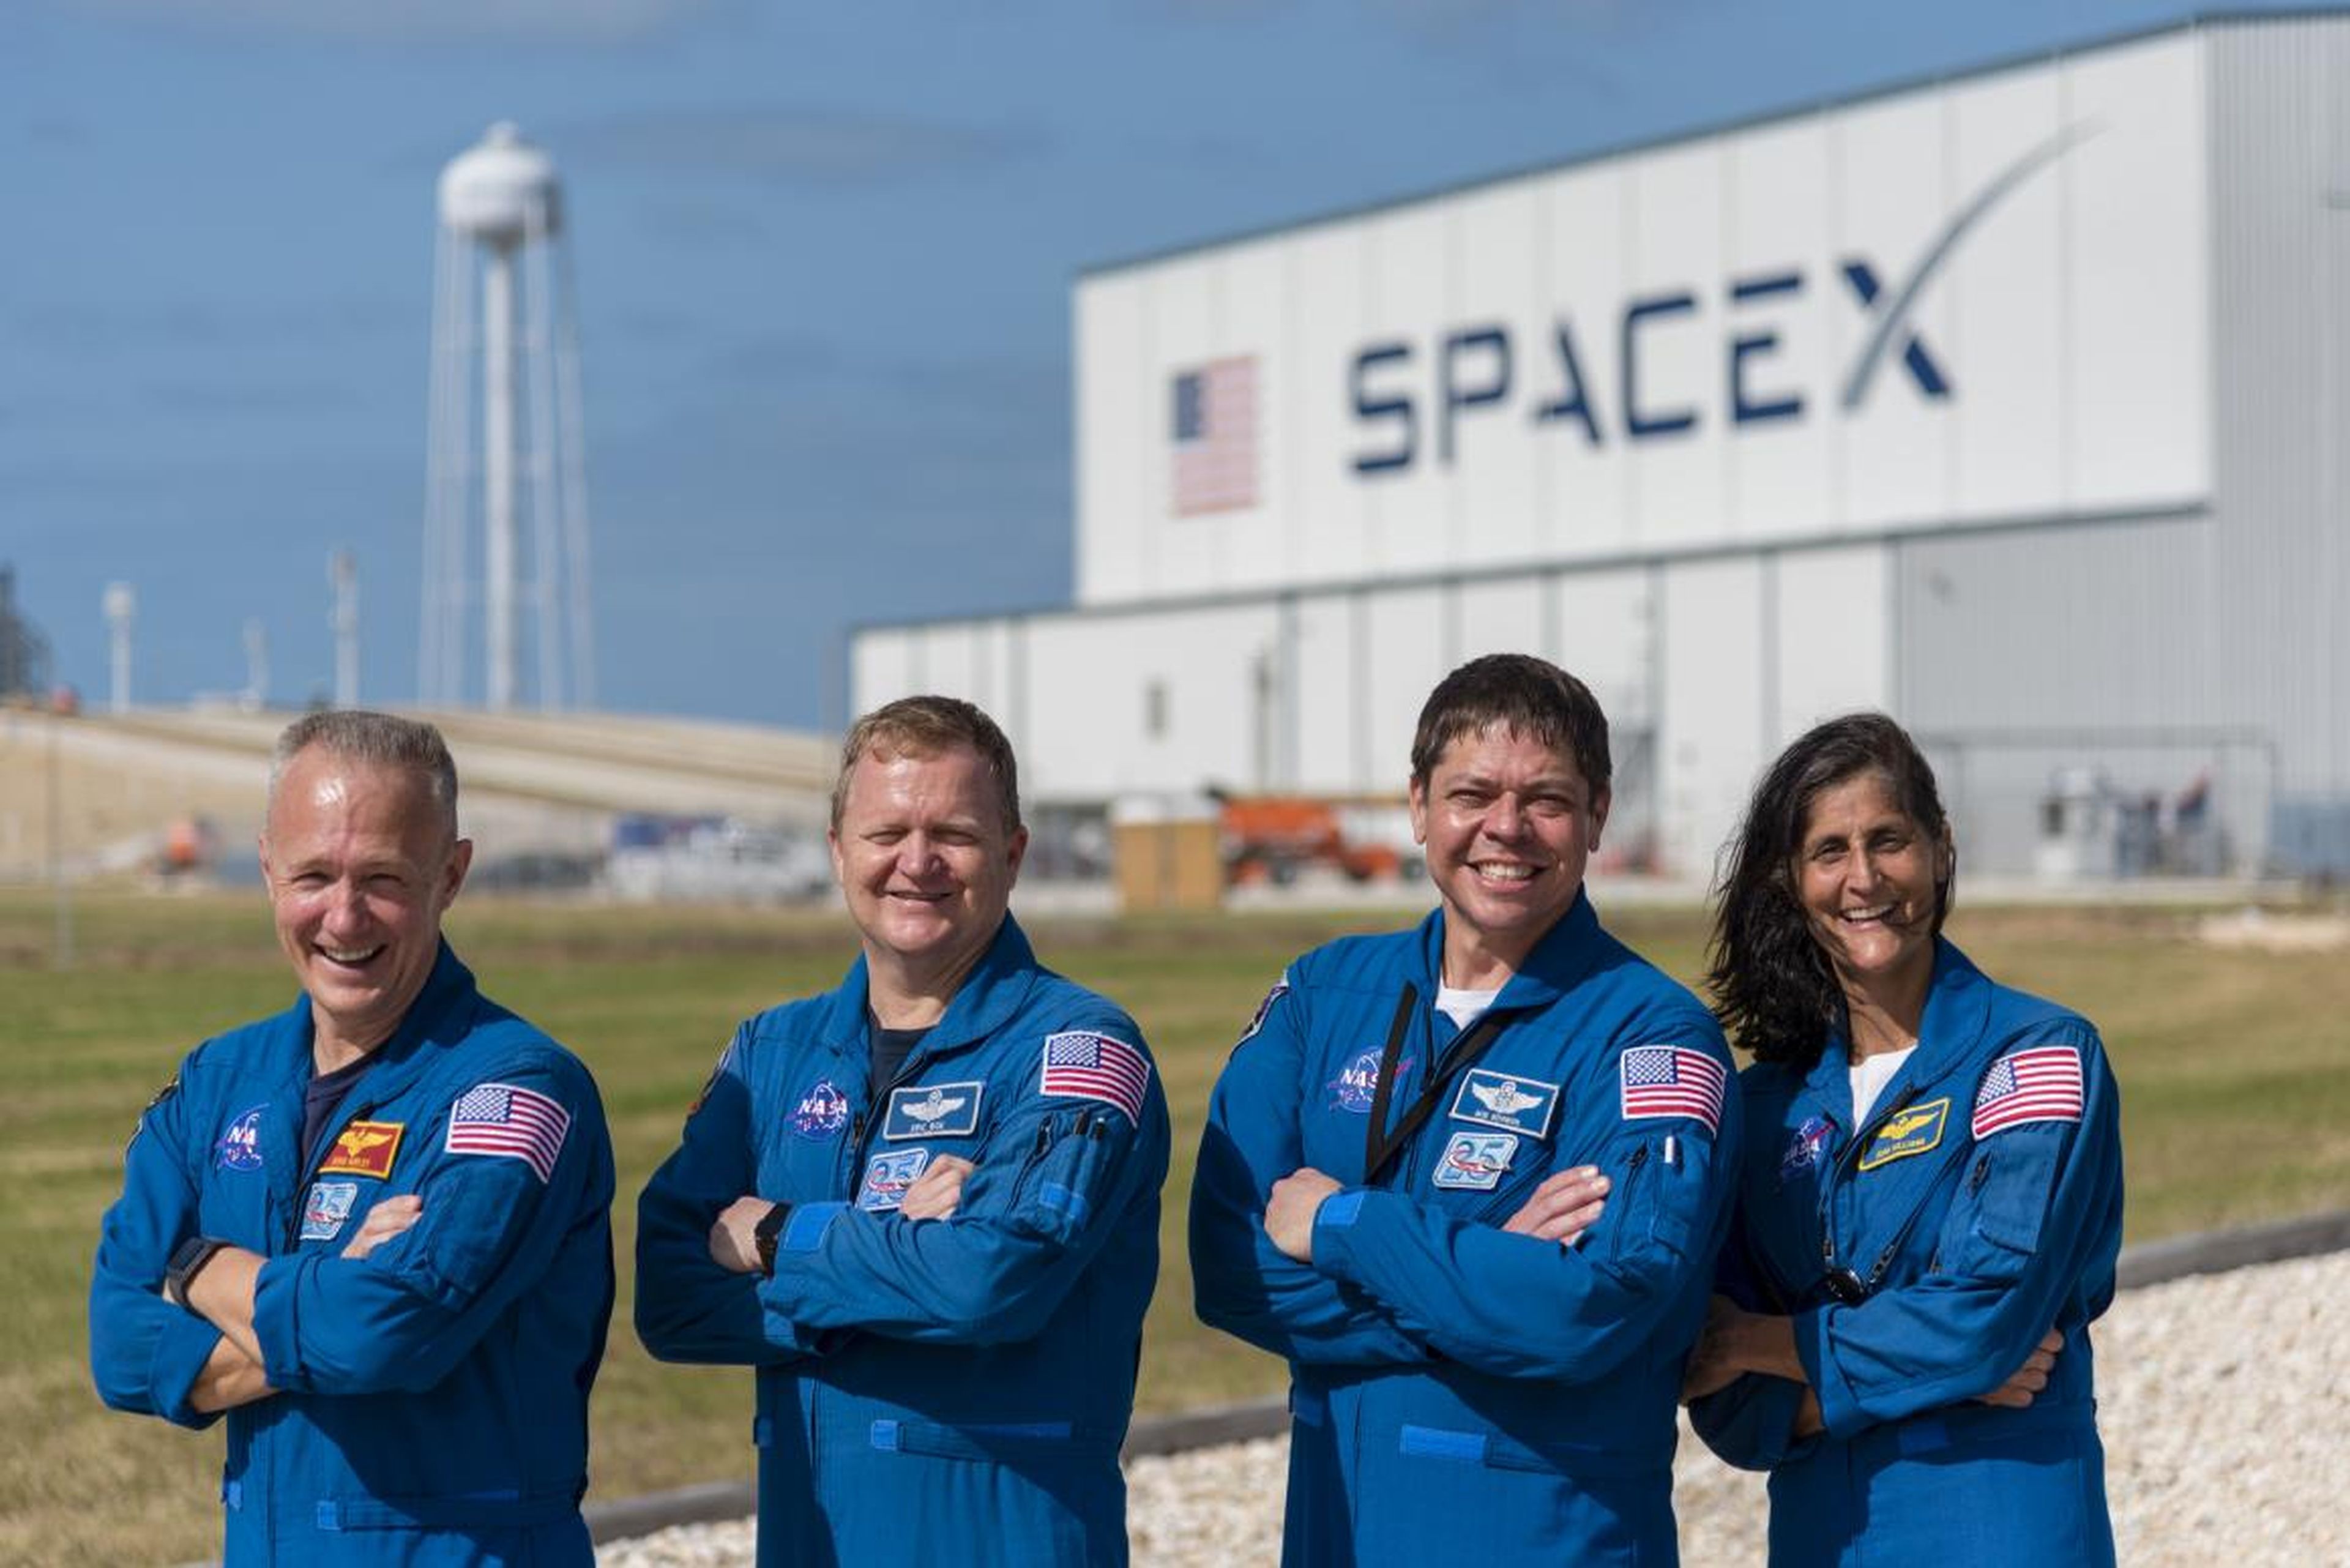 NASA astronauts who will be the first to fly inside SpaceX's Crew Dragon. Left to right: Doug Hurley, Eric Boe, Bob Behnken, and Sunita Williams.